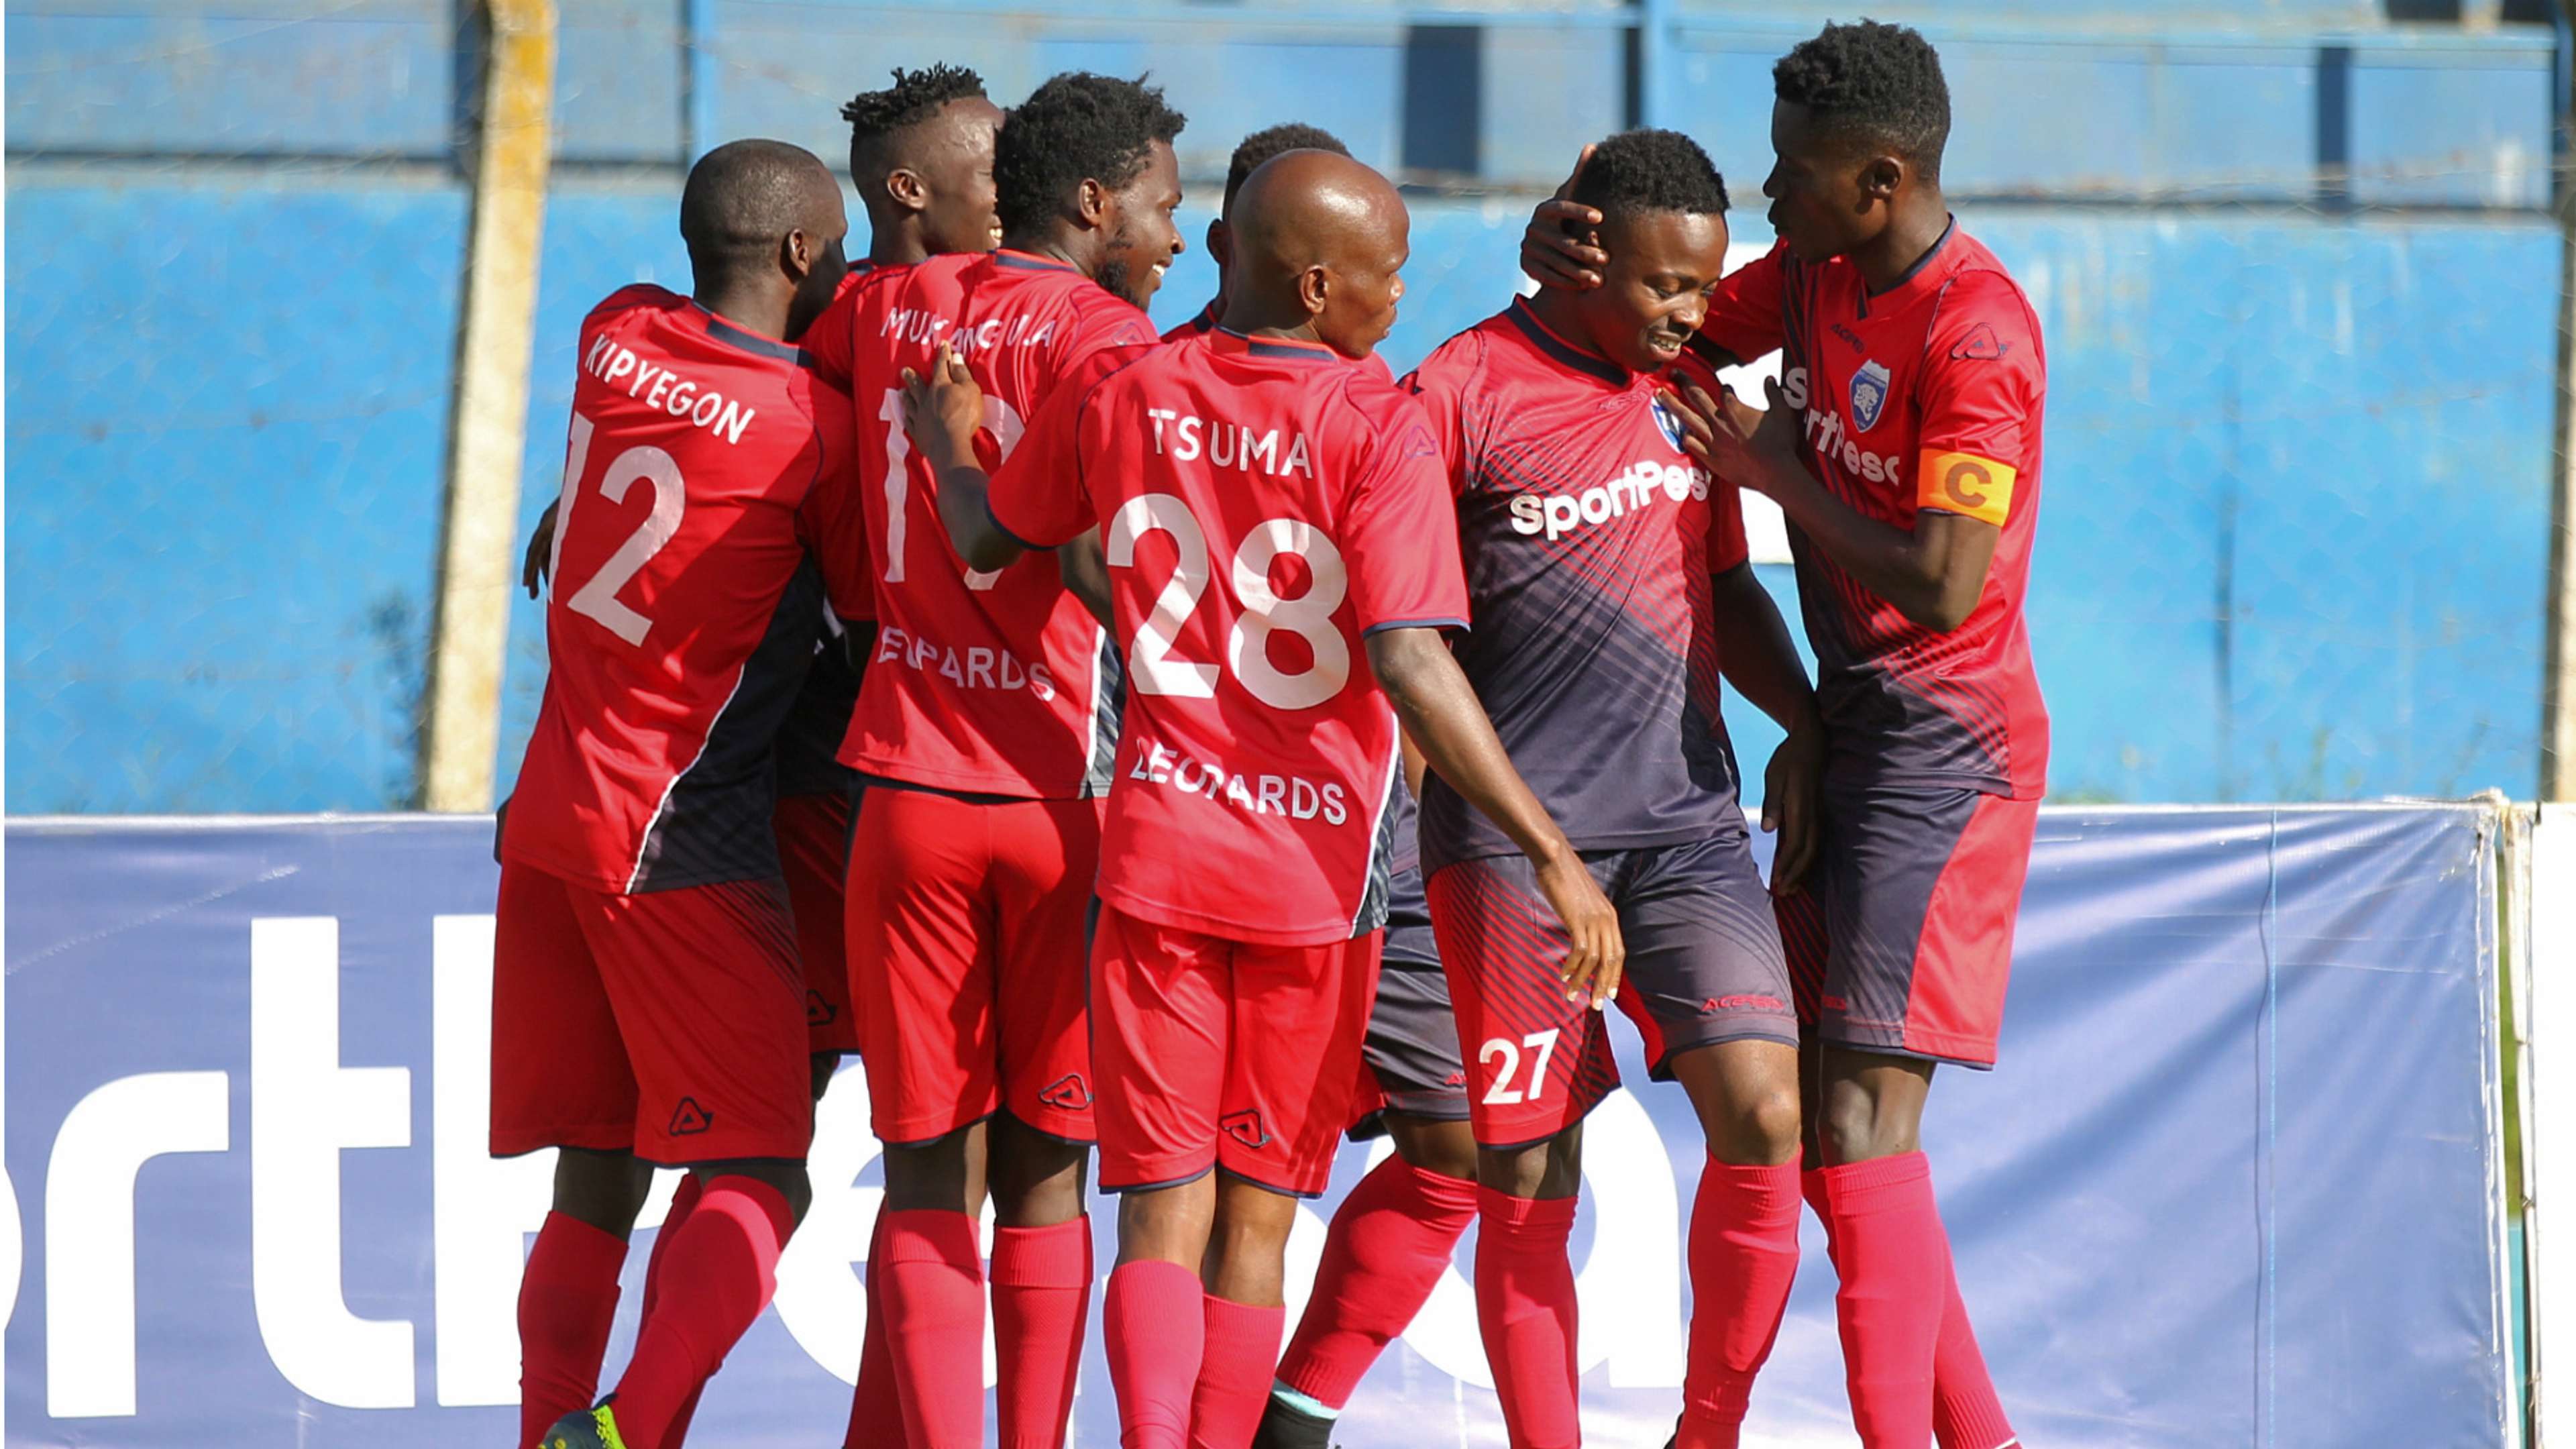 Isaac Kipyegon and AFC Leopards players celebrate.